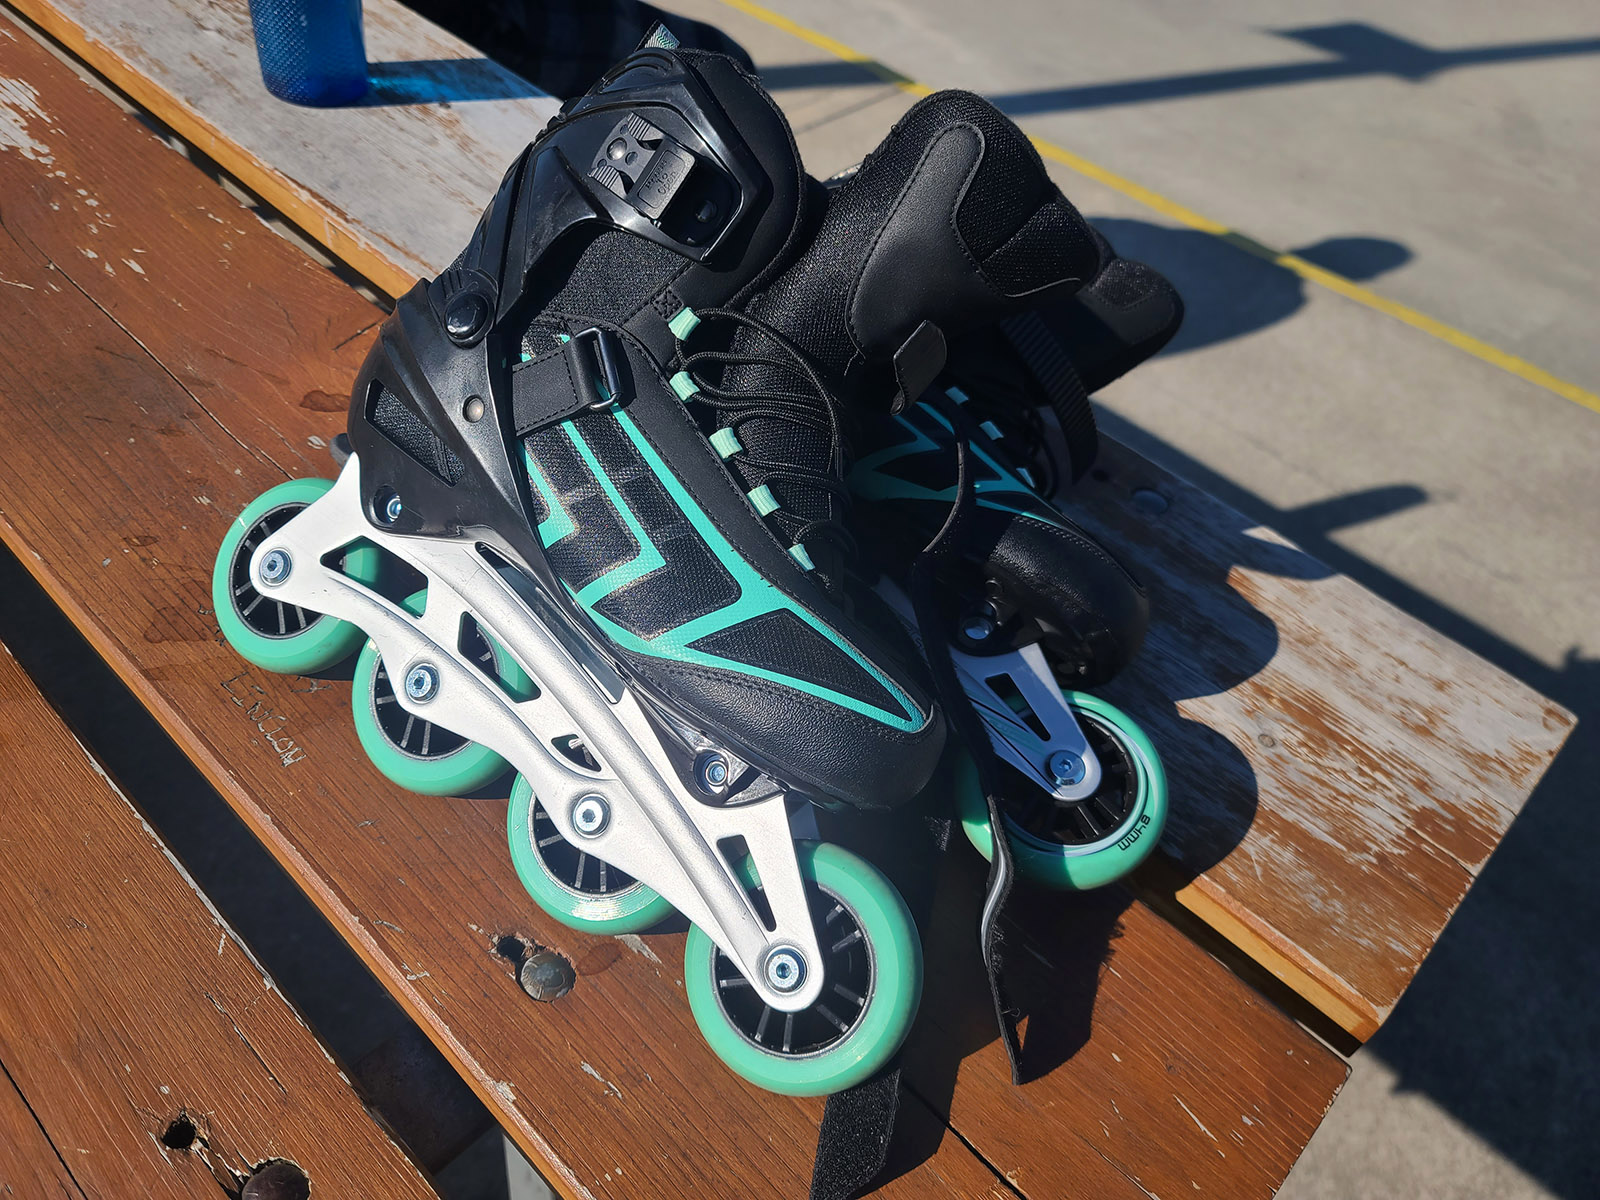 A pair of black and green recreational inline skates on a picnic table.